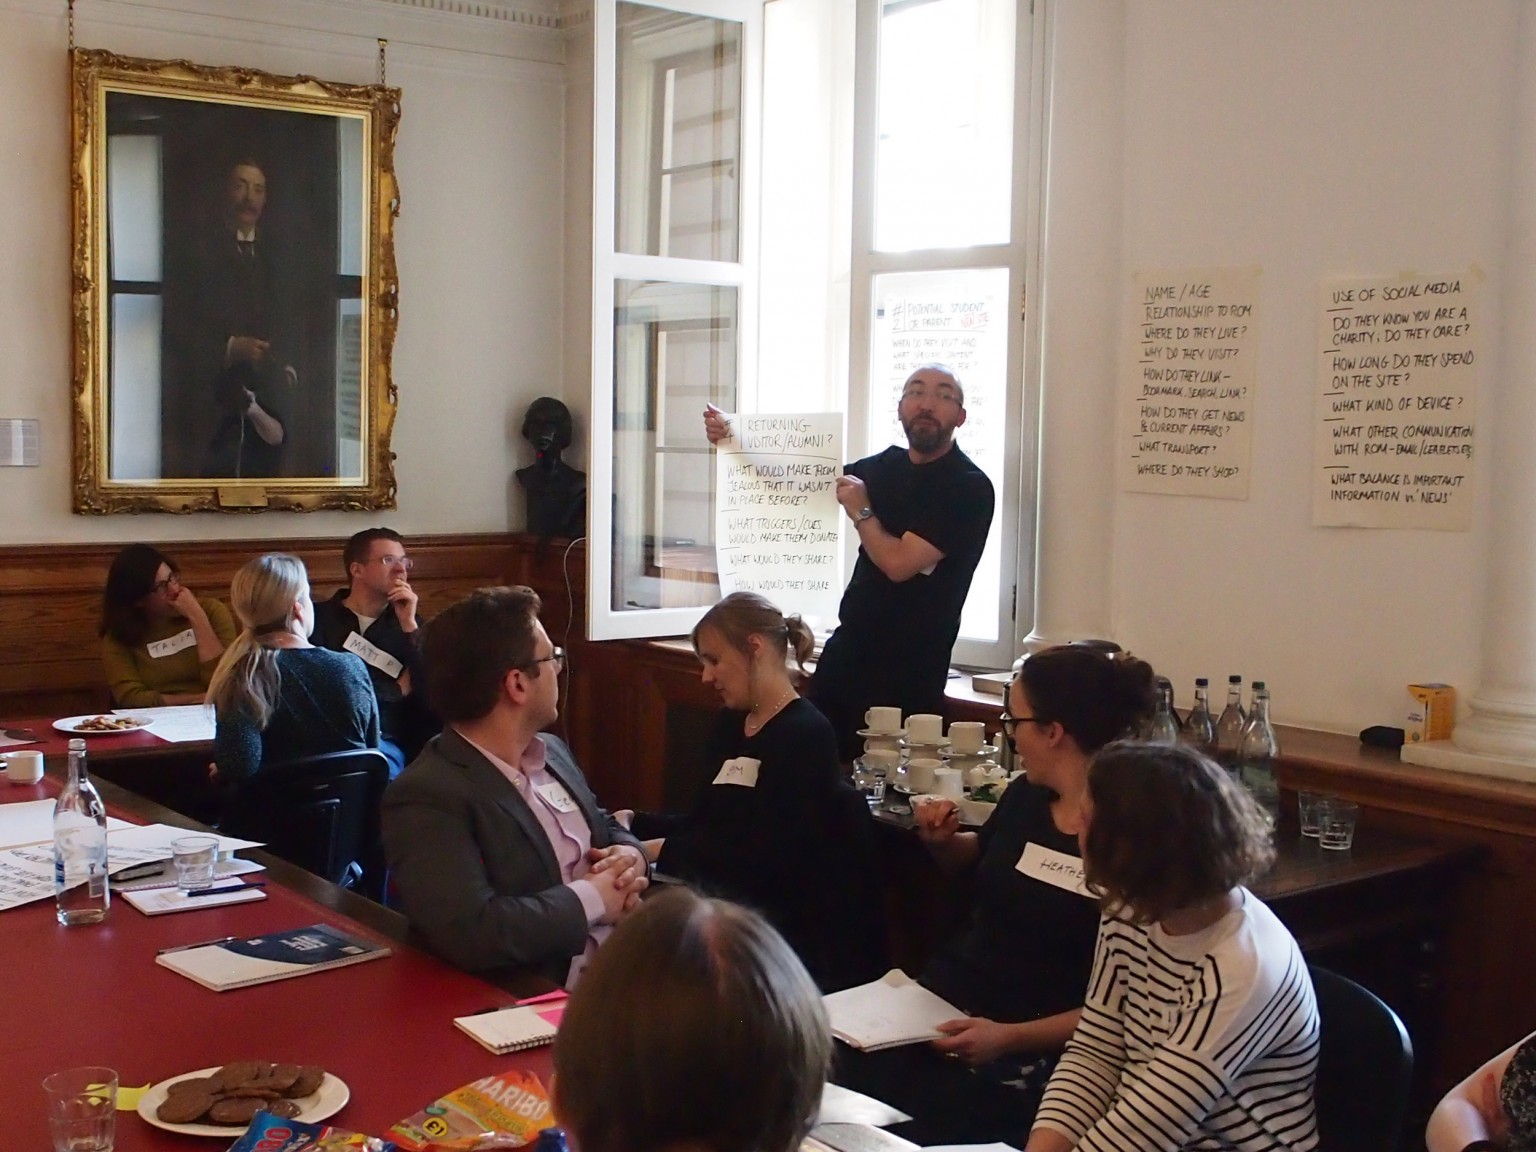 One of our workshops, in the historic setting of RCM’s South Kensington building.